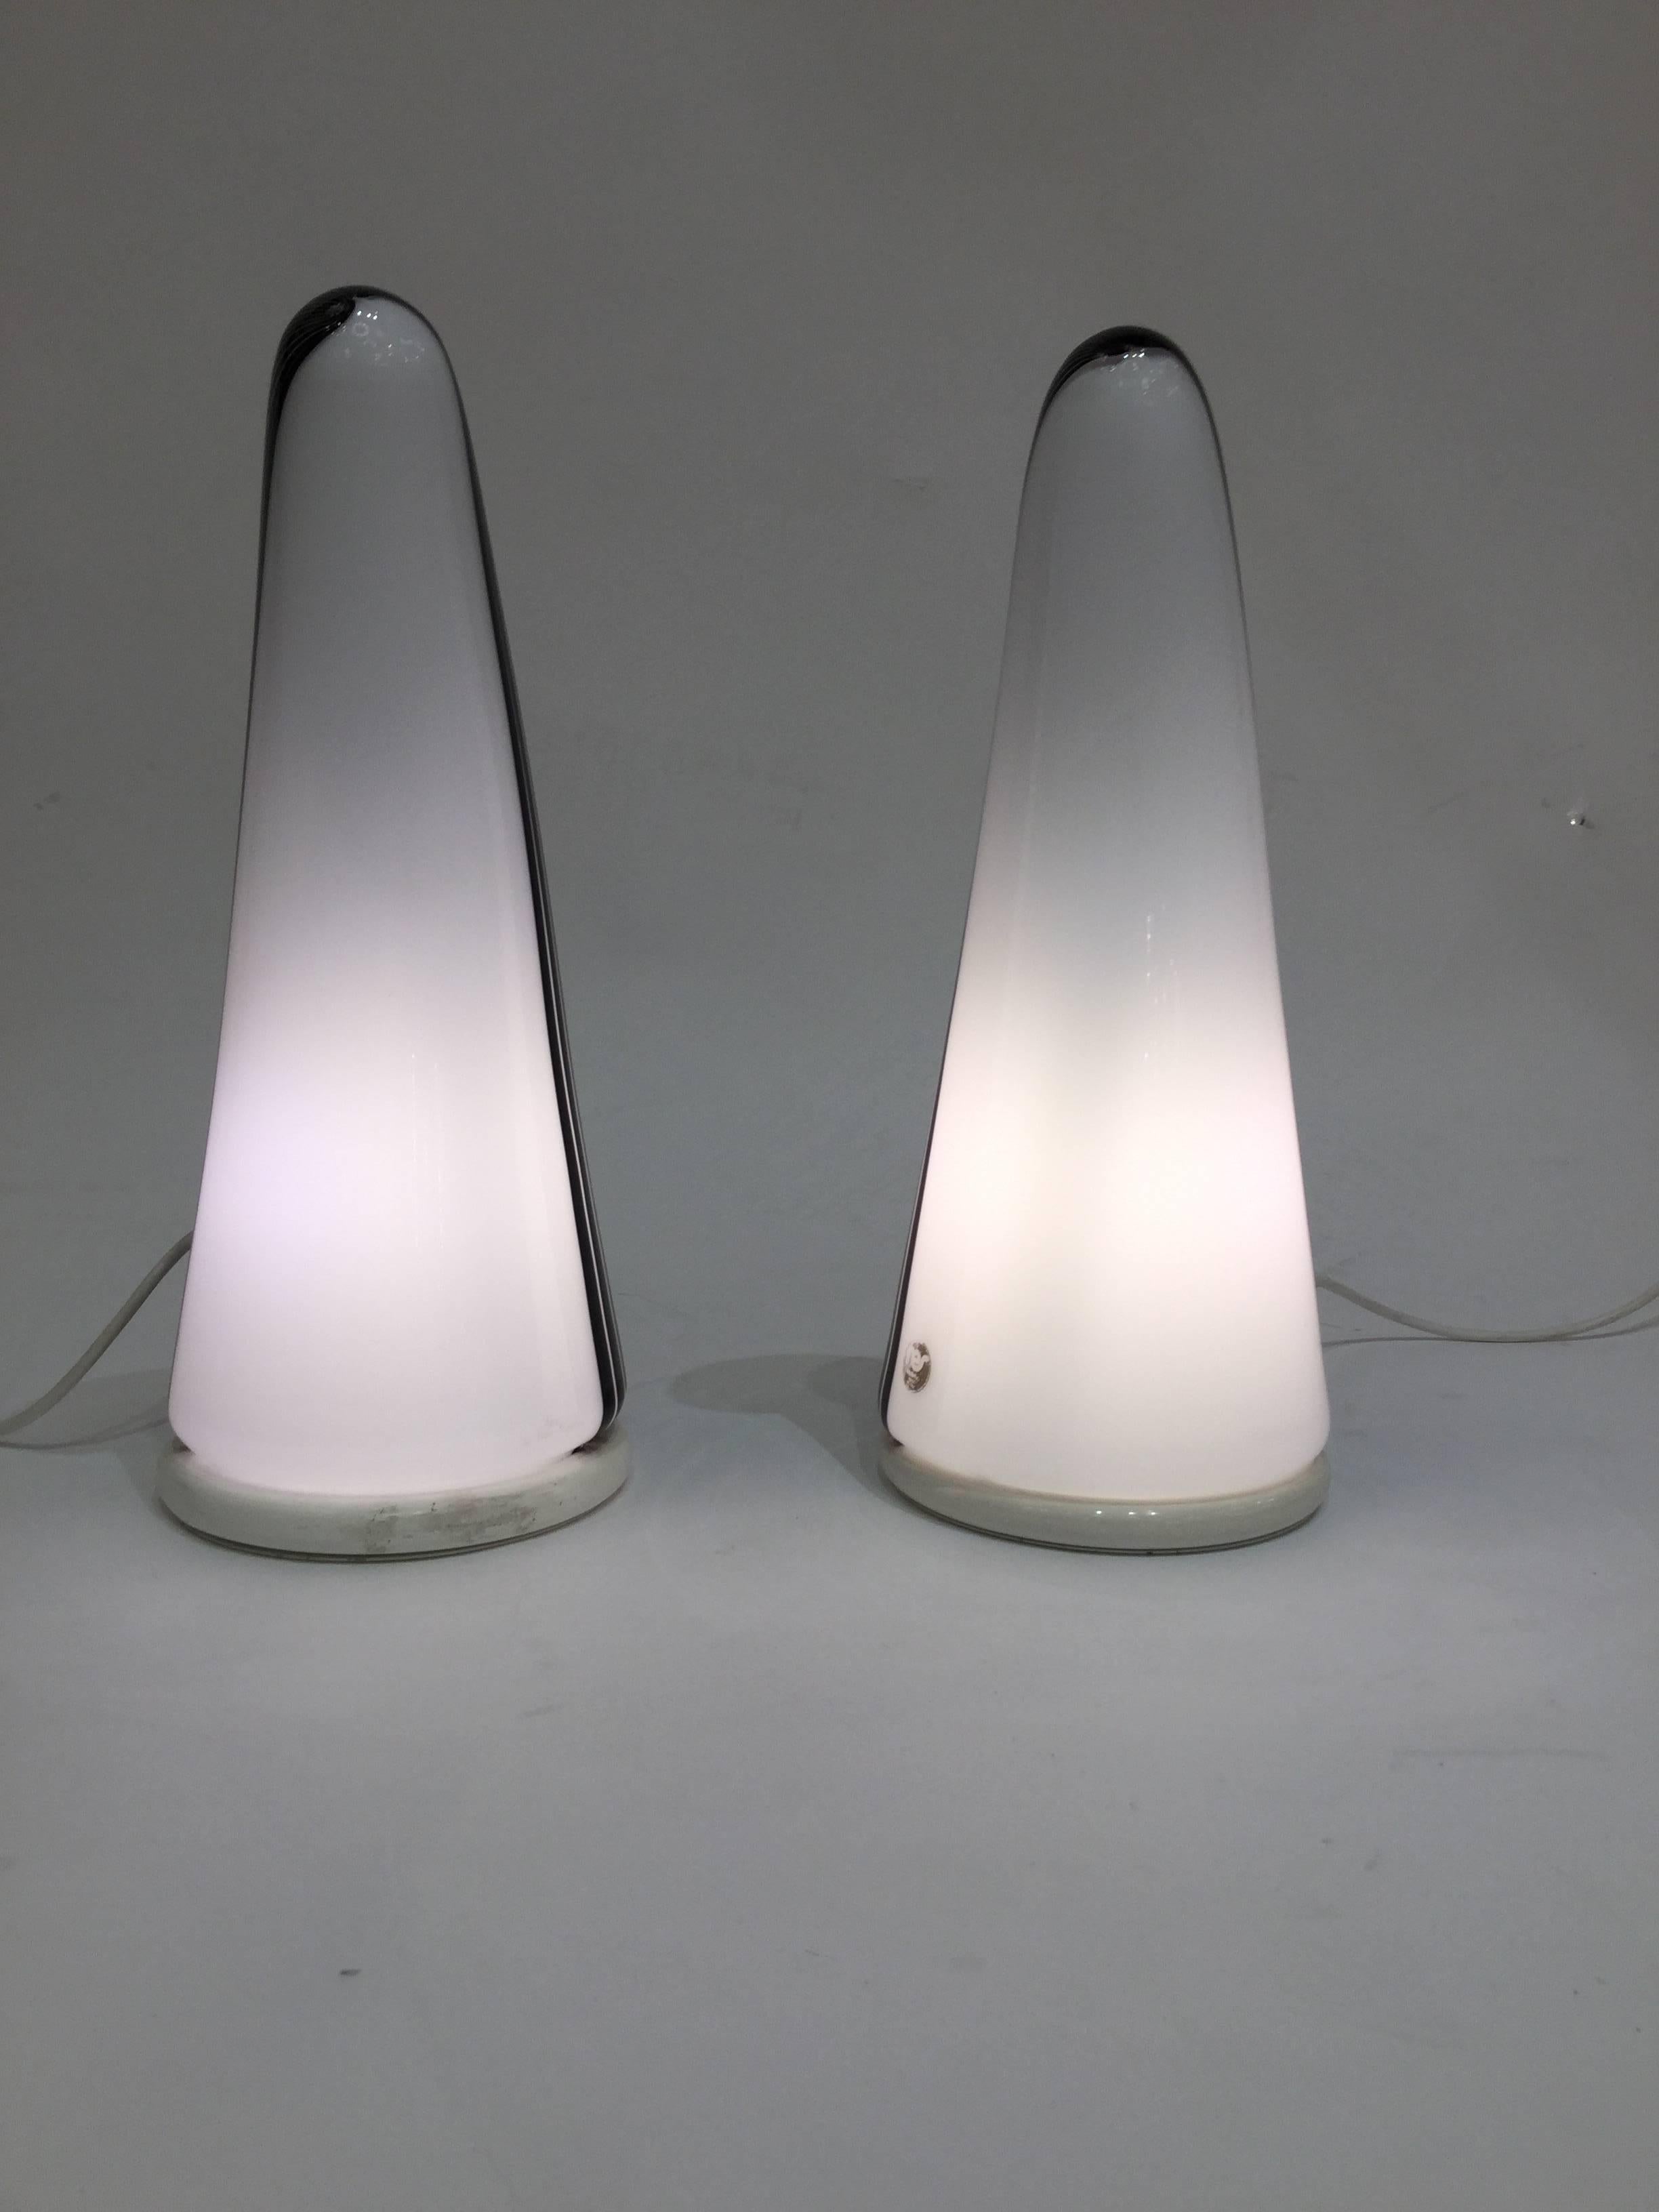 Stripped Murano glass pair of lamps on painted metal base.